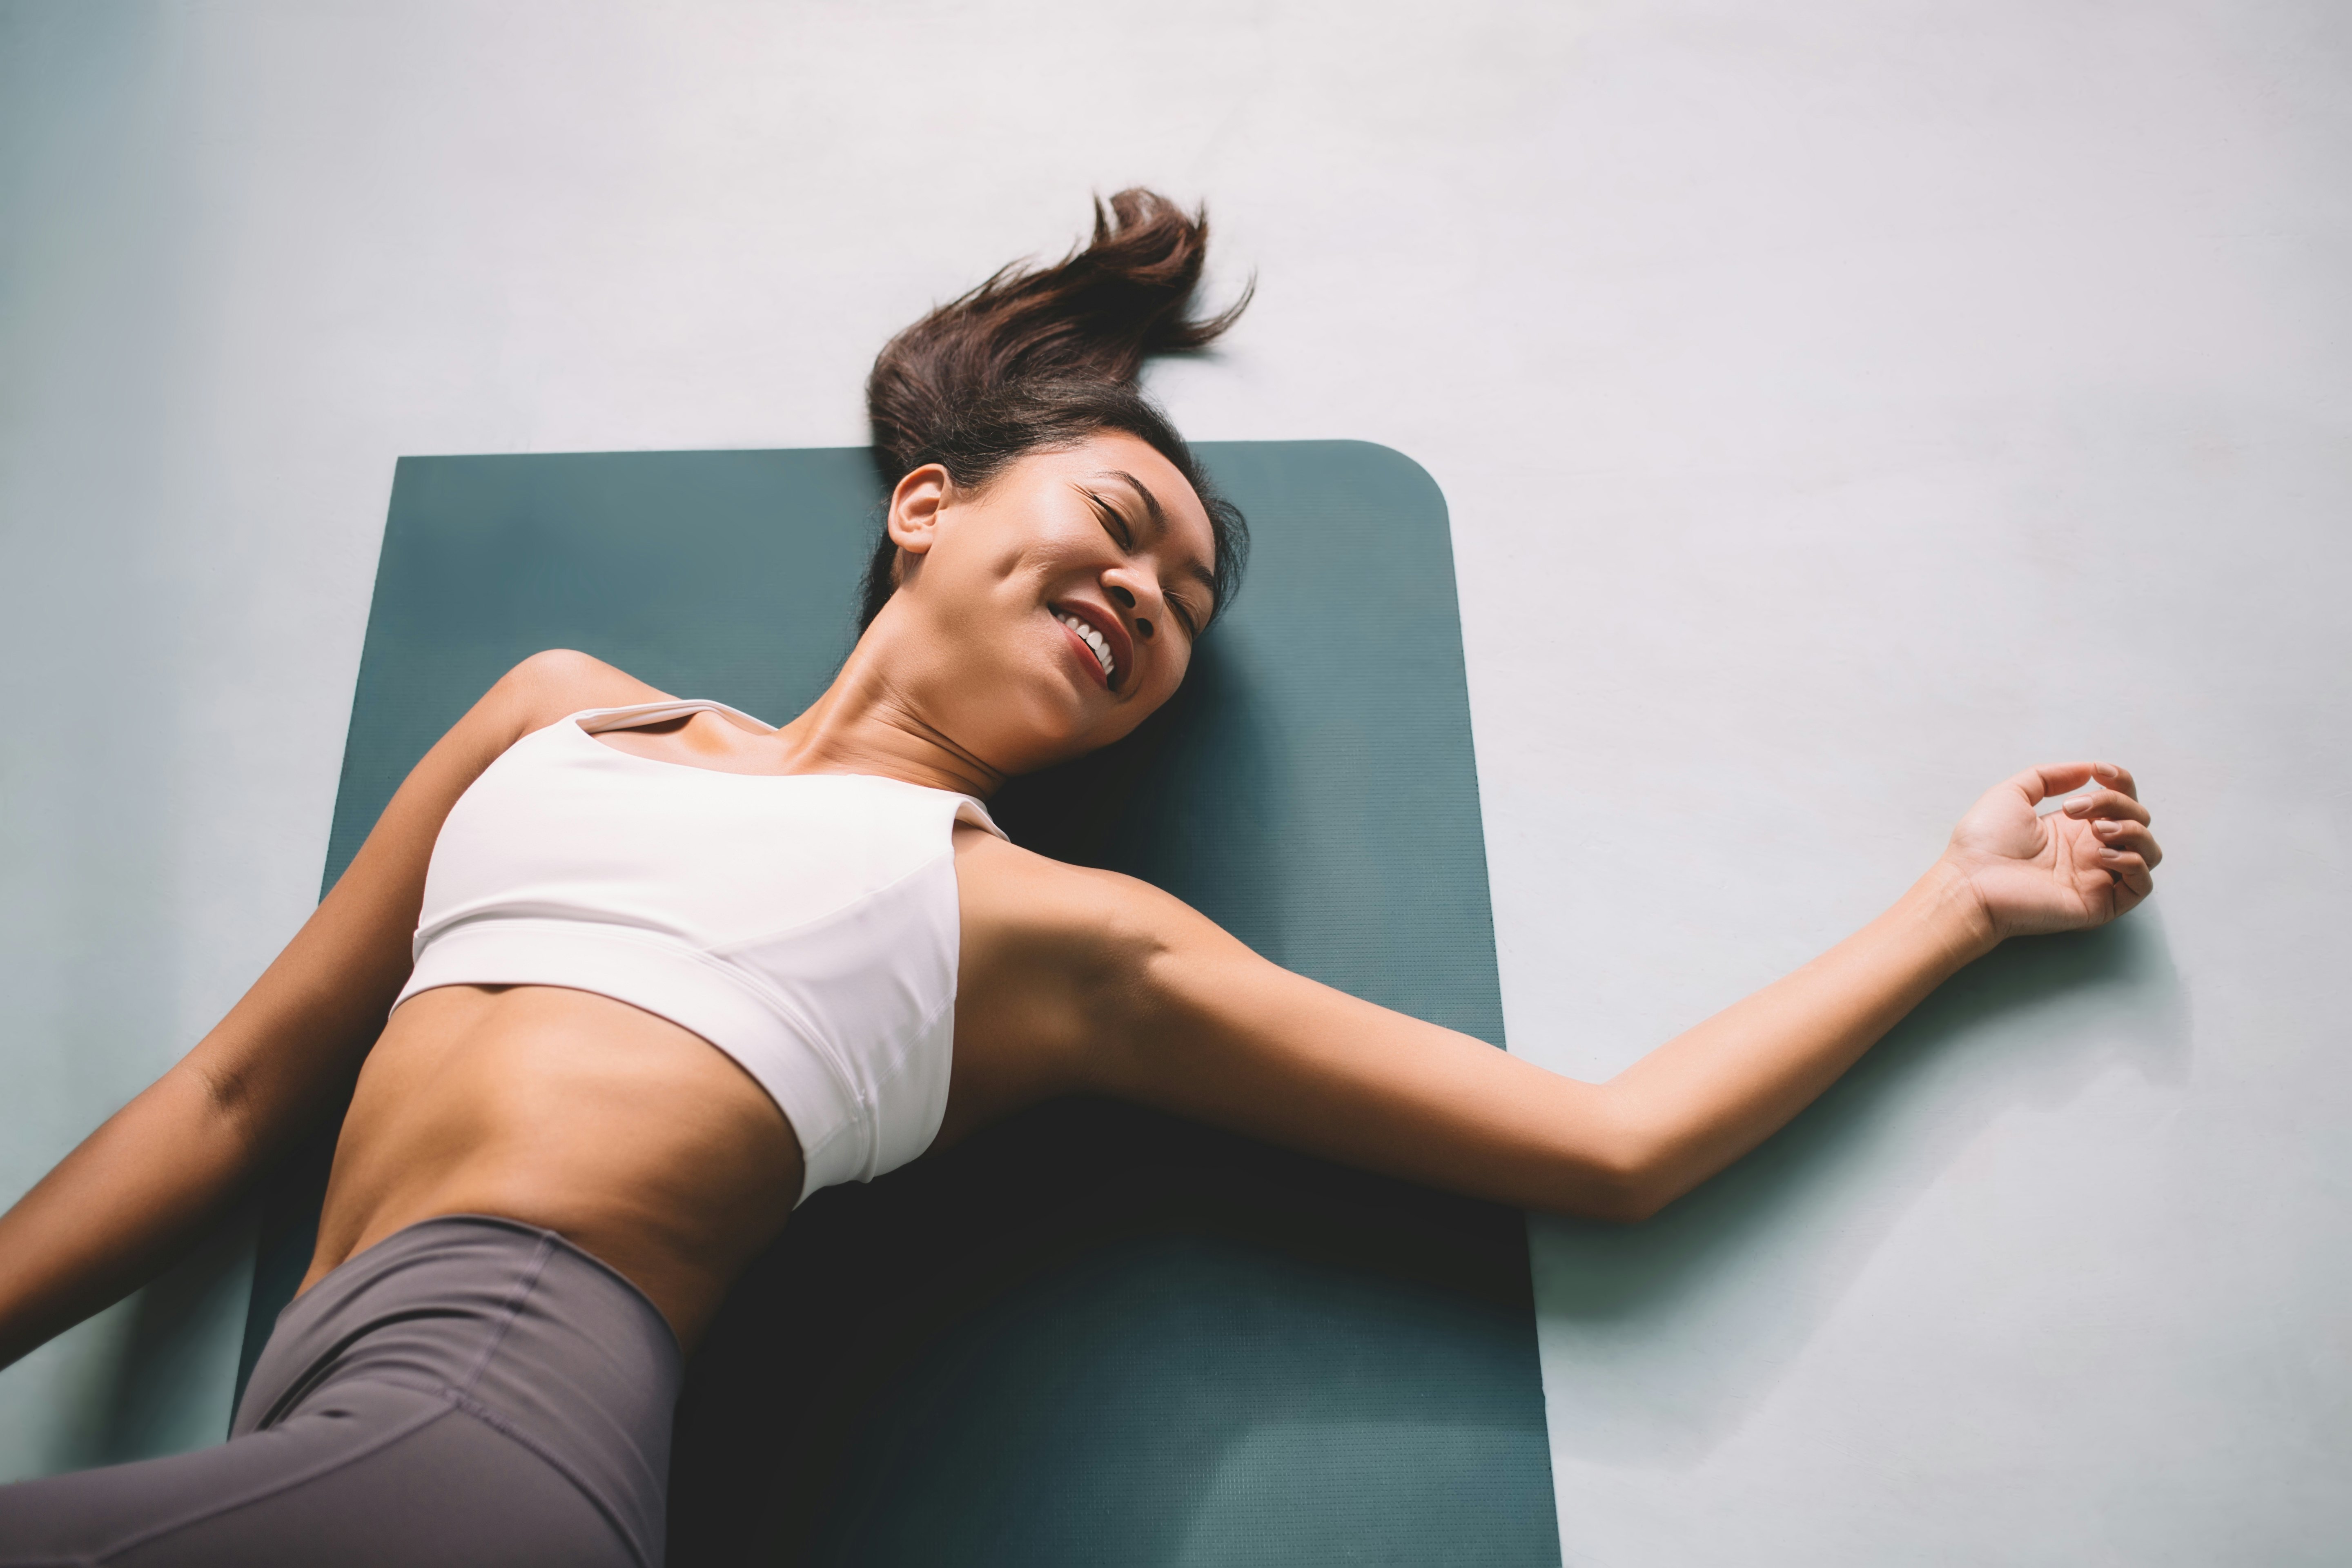 Top 3 Pilates Exercises You Can Do From Home, According to An